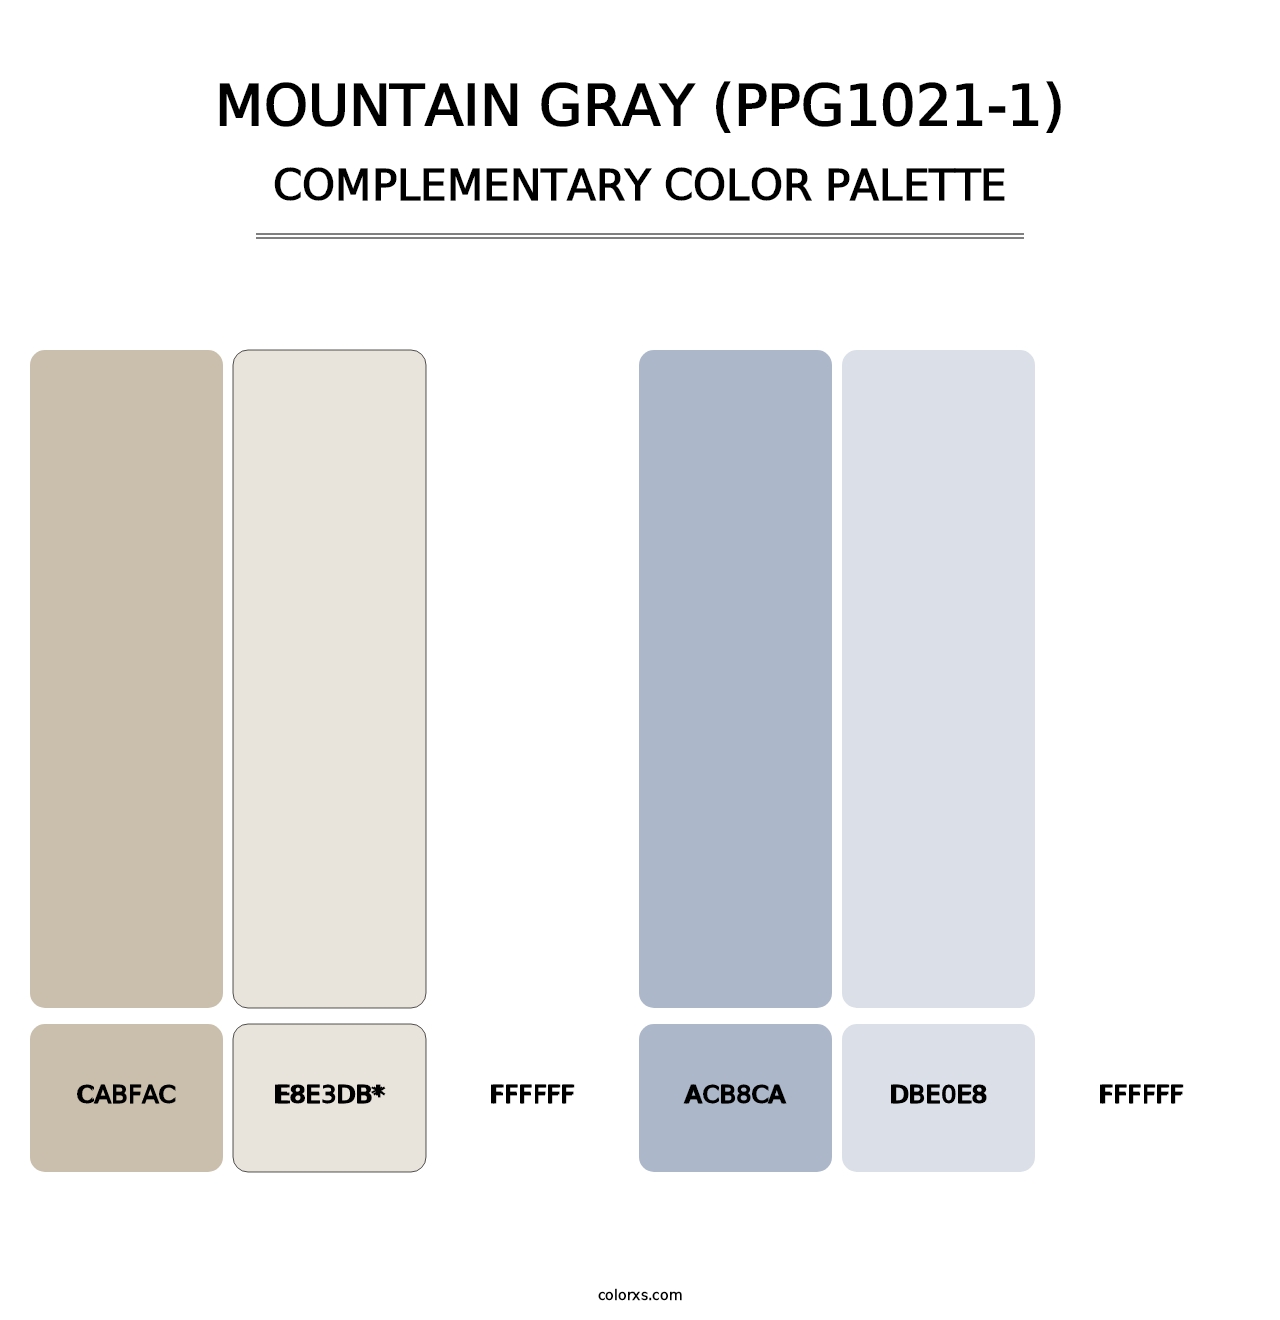 Mountain Gray (PPG1021-1) - Complementary Color Palette